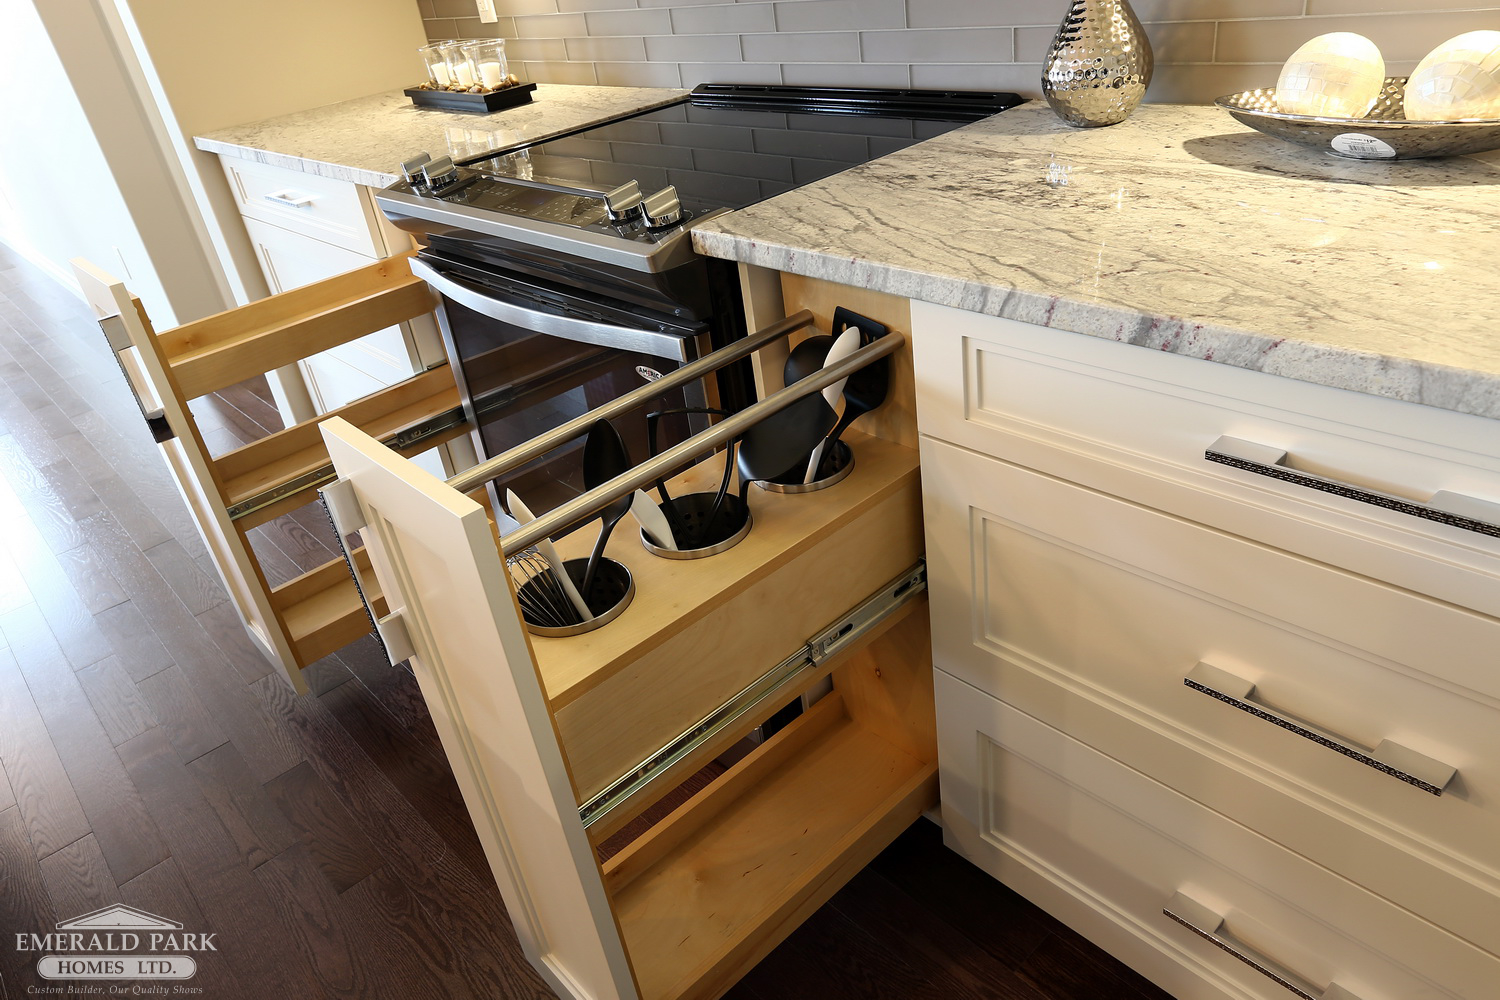 Emerald Park Homes Custom Designed New Holmes Approved Home Regina YQR kitchen special features organization pullout spice rack and utensil storage